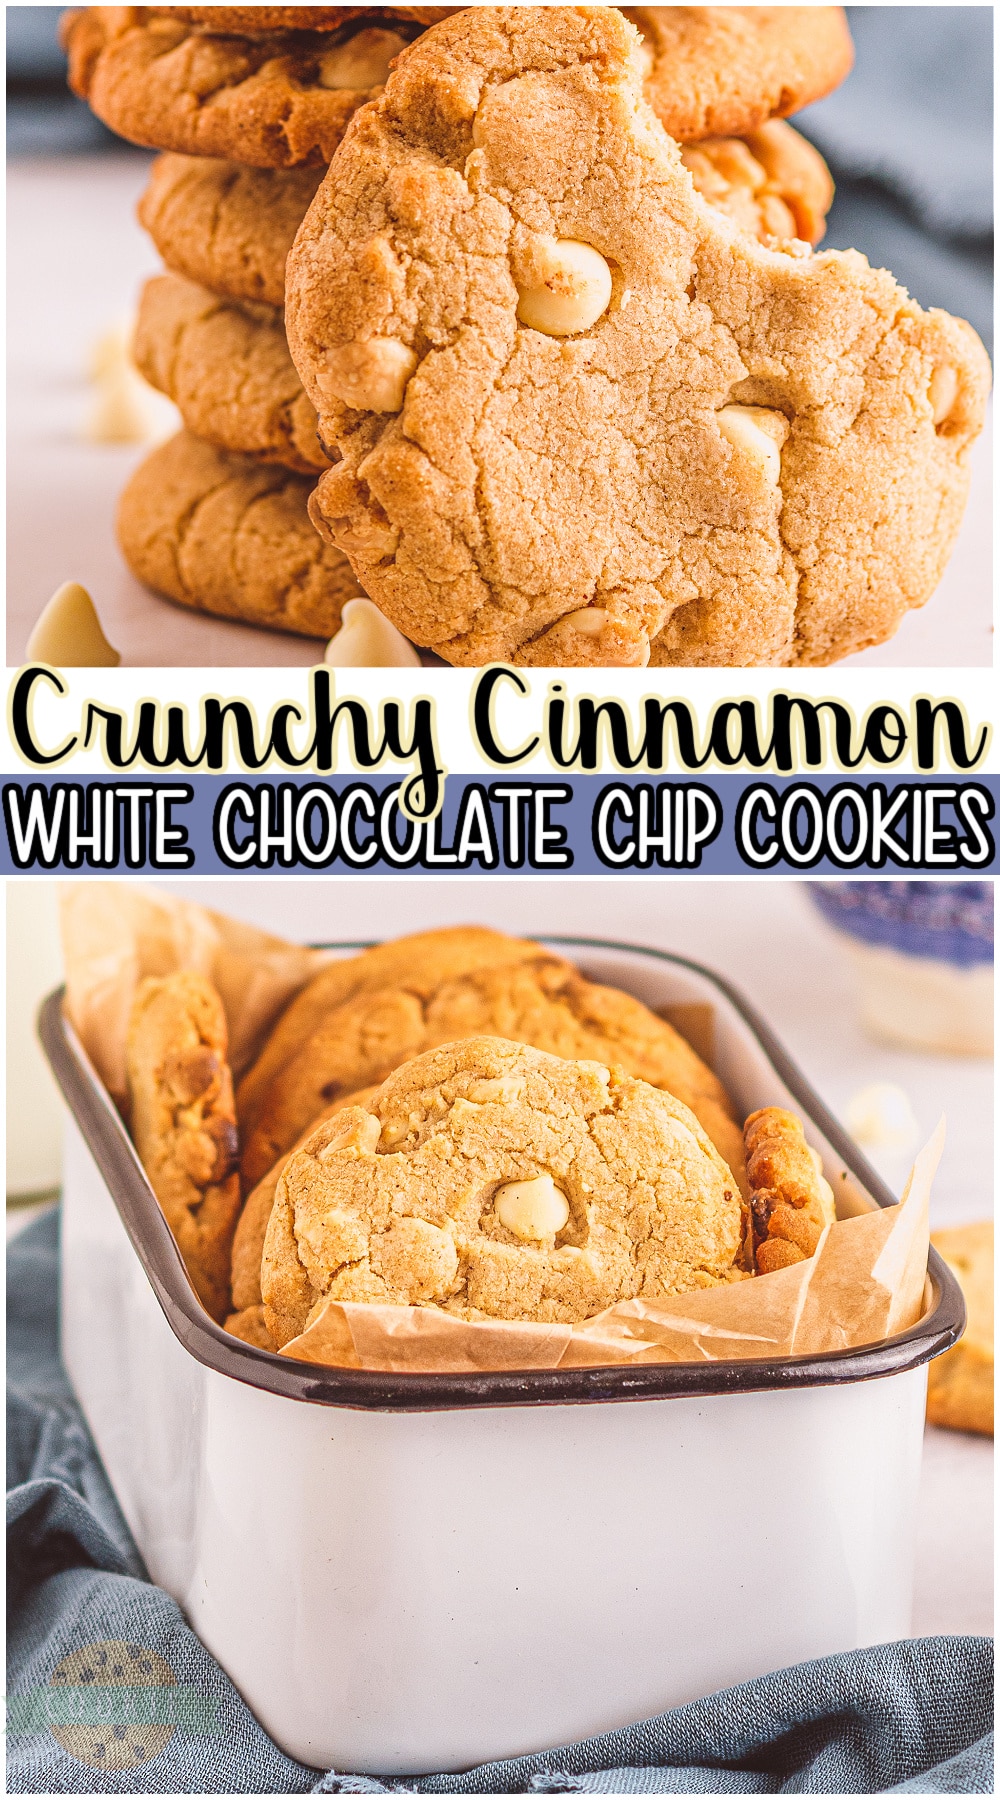 Crunchy white chocolate cinnamon cookies are packed with warm cinnamon flavor and gooey white chocolate chips. A fun twist on classic chocolate chip cookies that are perfect for the holidays!